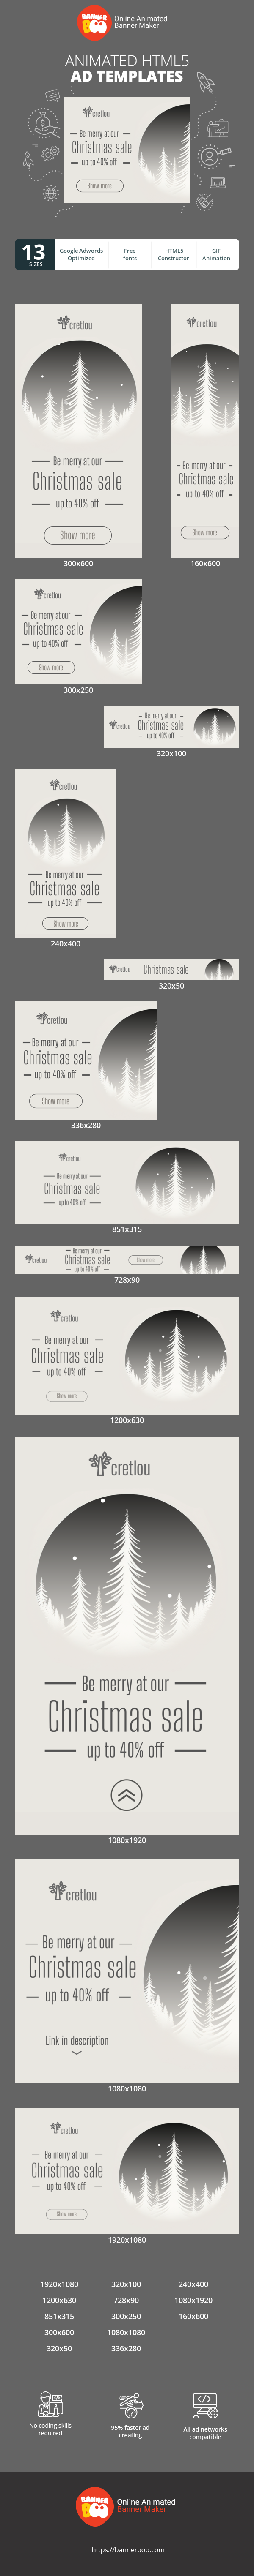 Banner ad template — Be Merry At Our Christmas Sale — Up To 40% Off